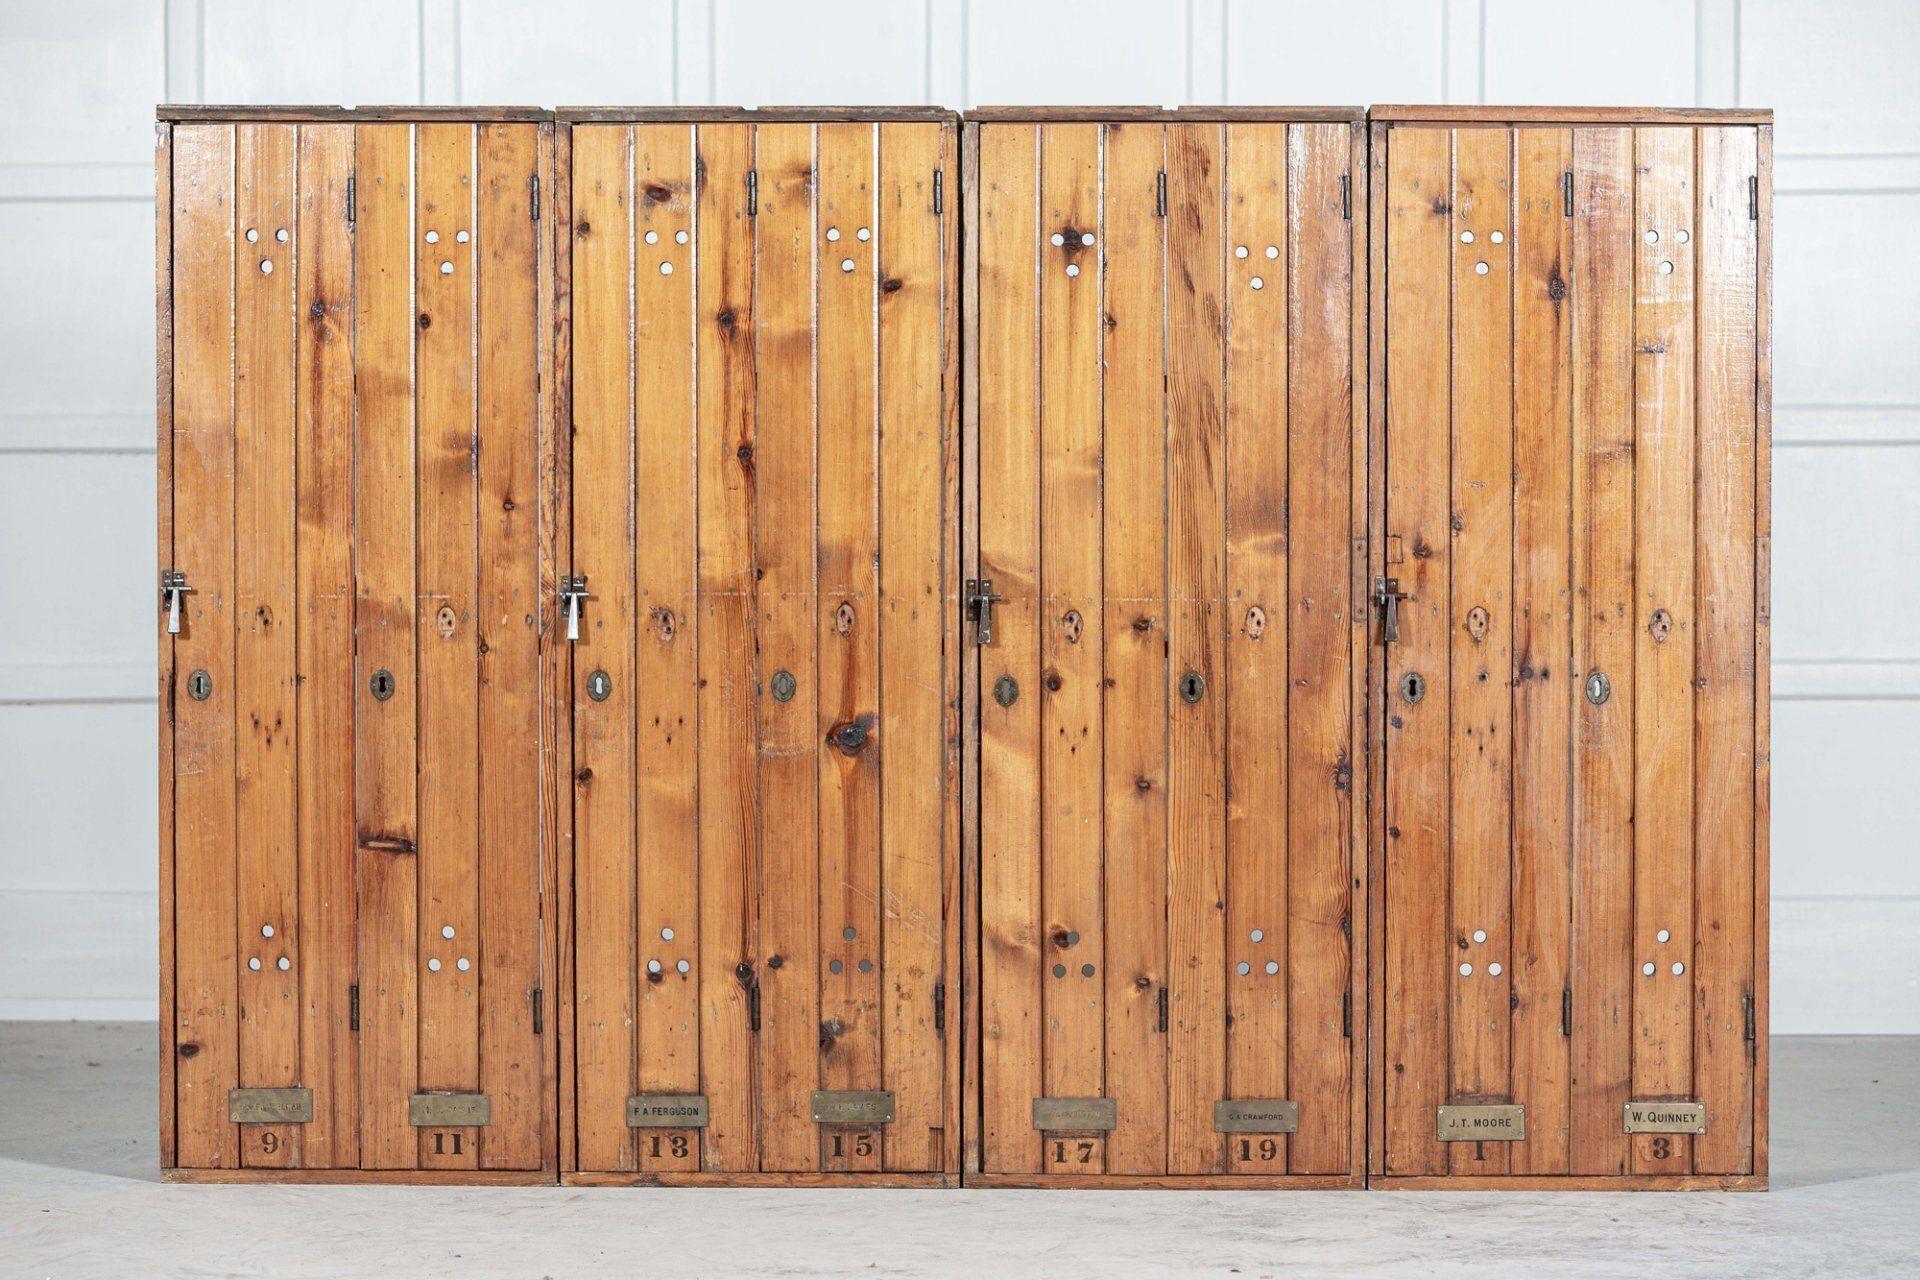 circa 1920
X4 English pine golf club Lockers large
In original condition
Price is each
Measures: W 50 x D 26 x H 134.
  